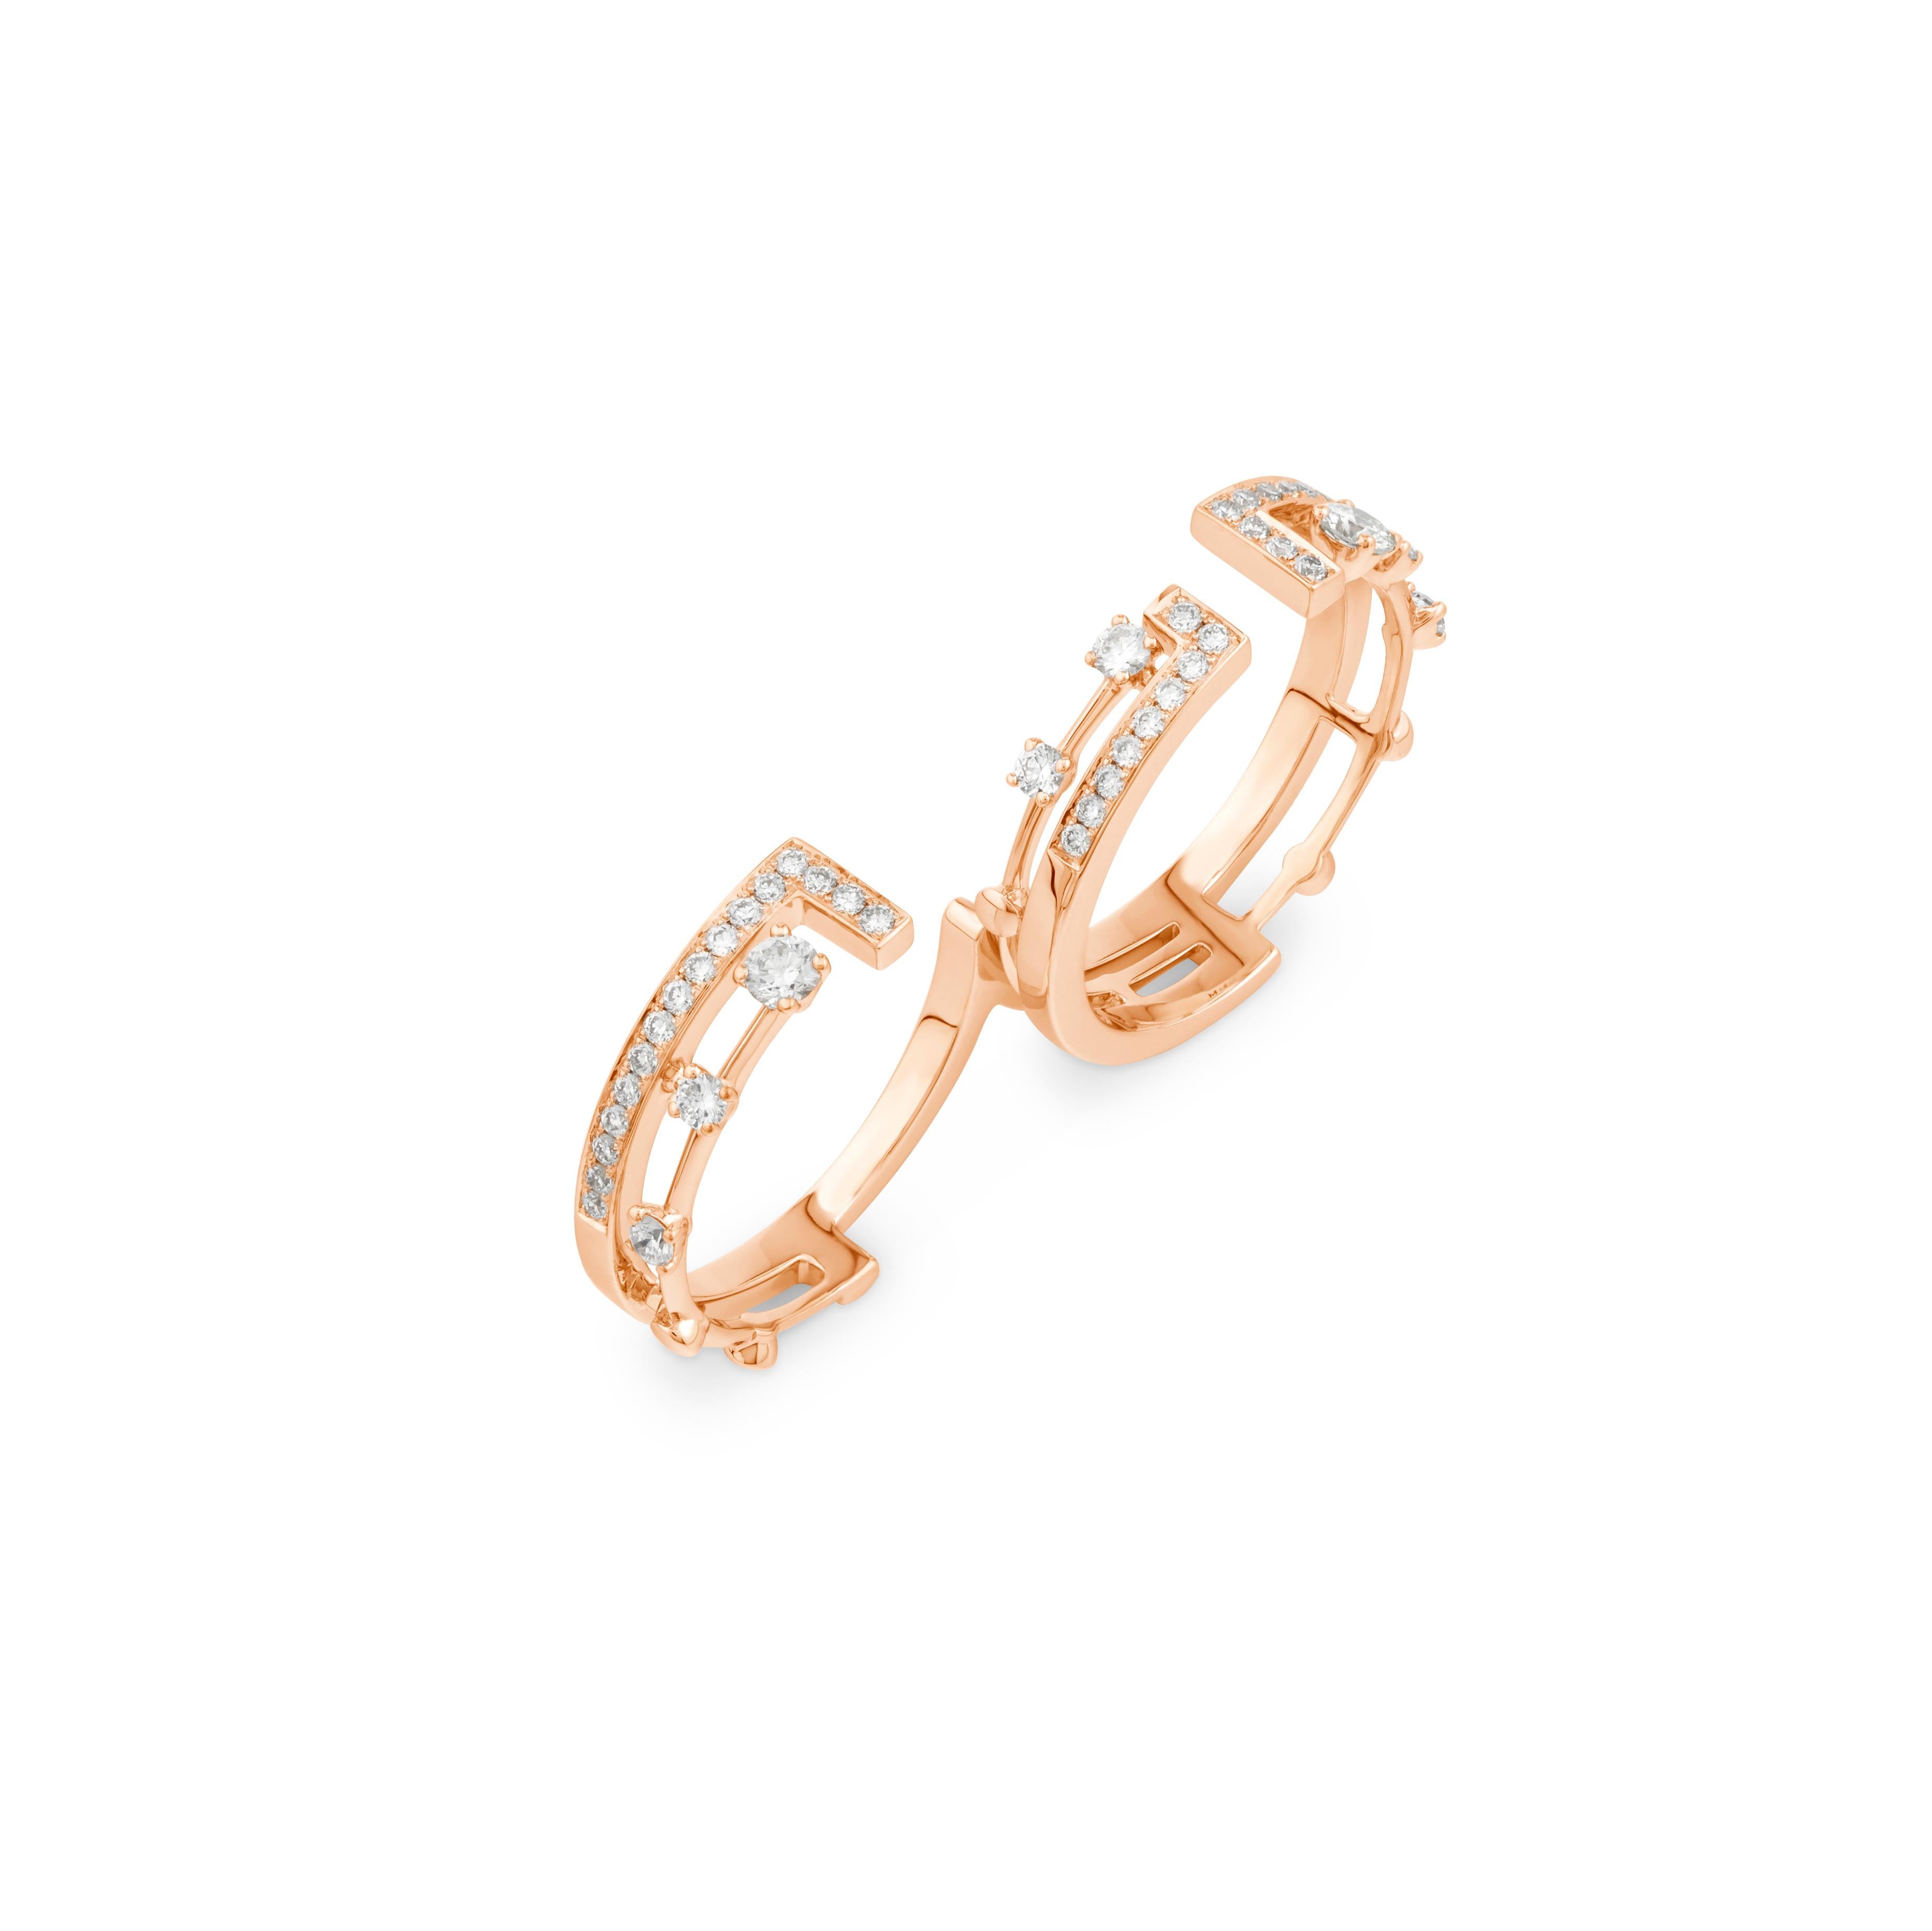 As dynamic and iconic as the streets of Manhattan, the Avenues Multi-Finger Ring rests across two adjacent fingers with an asymmetrical pattern of brilliant cut diamonds. Crafted in your choice of 18K white, rose, or yellow gold, this contemporary